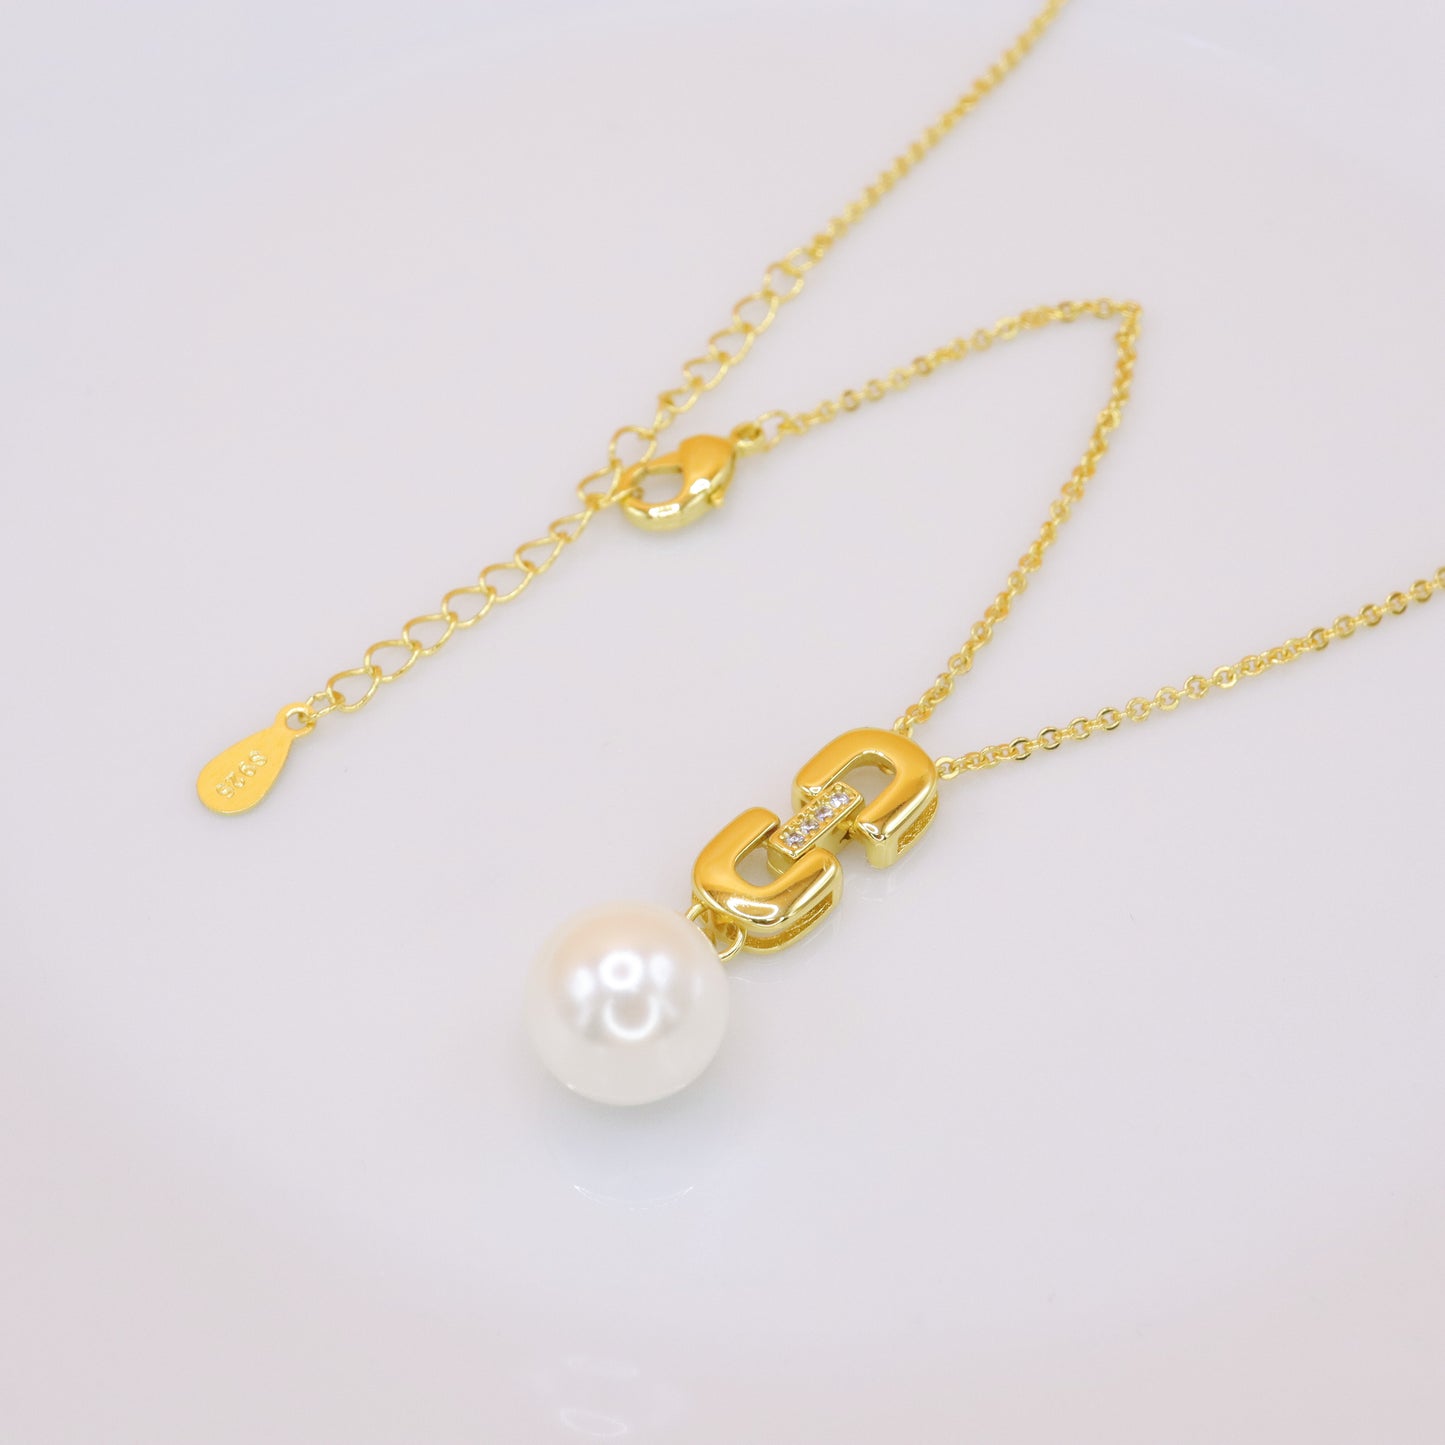 Turn Around - Akoya Pearl & 18K Gold Plated S925 Sterling Silver Necklace